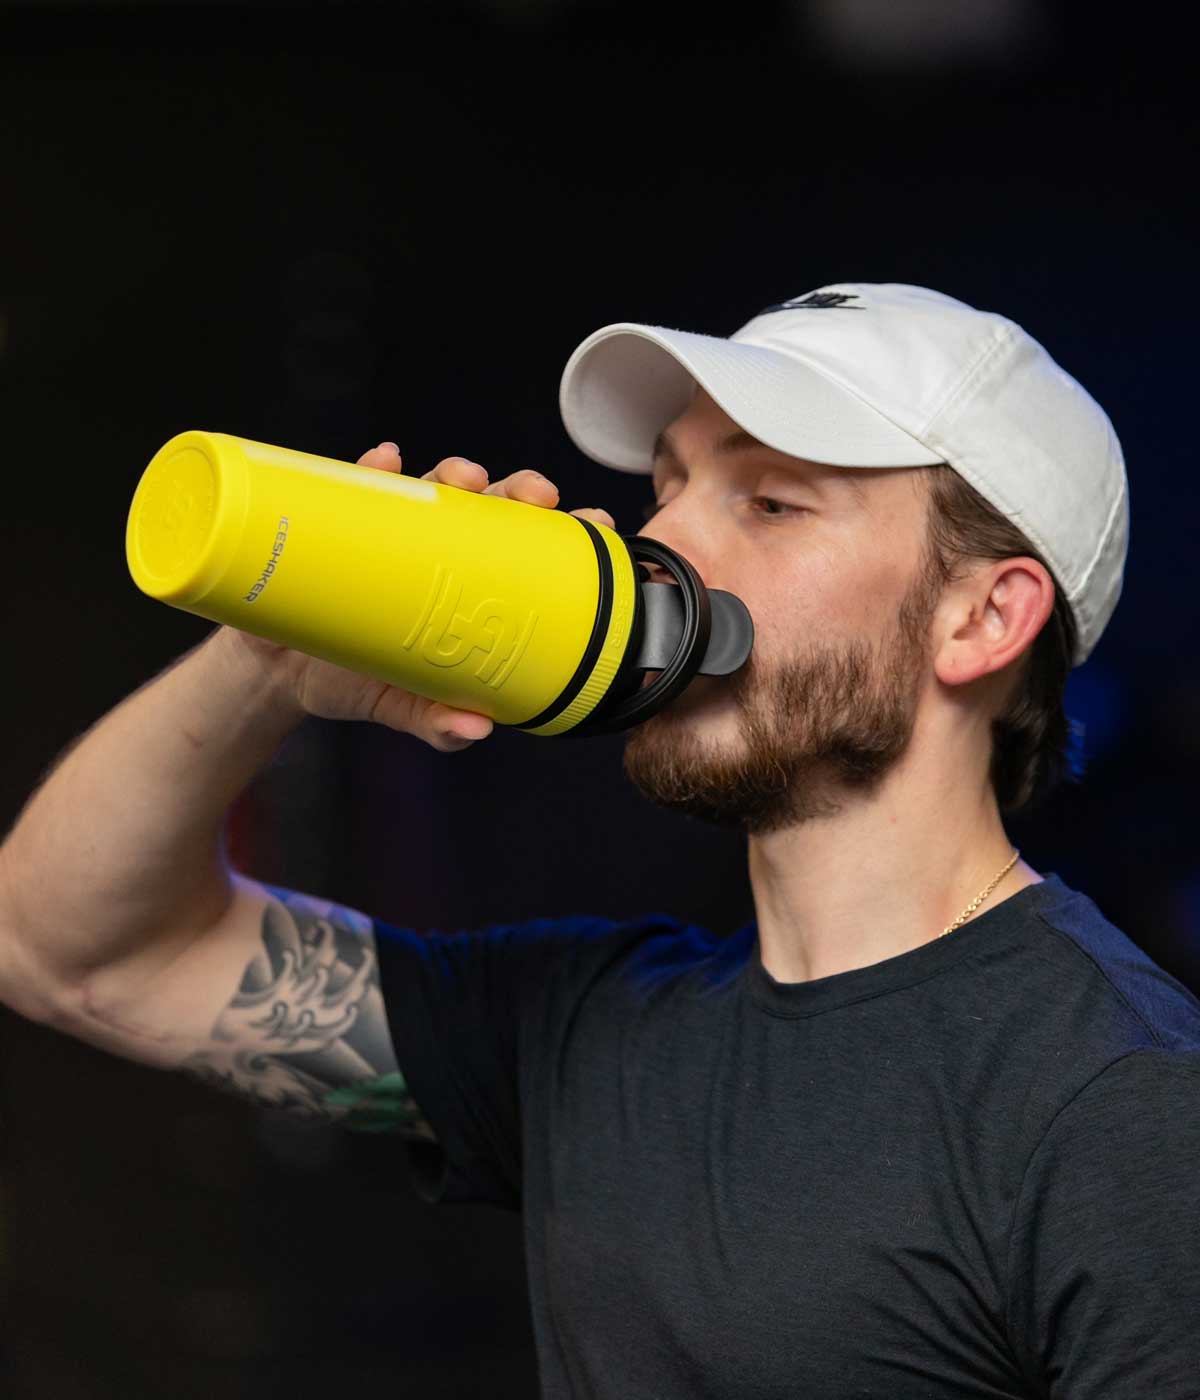 A young man is taking a drink from a Yellow 26oz Ice Shaker.